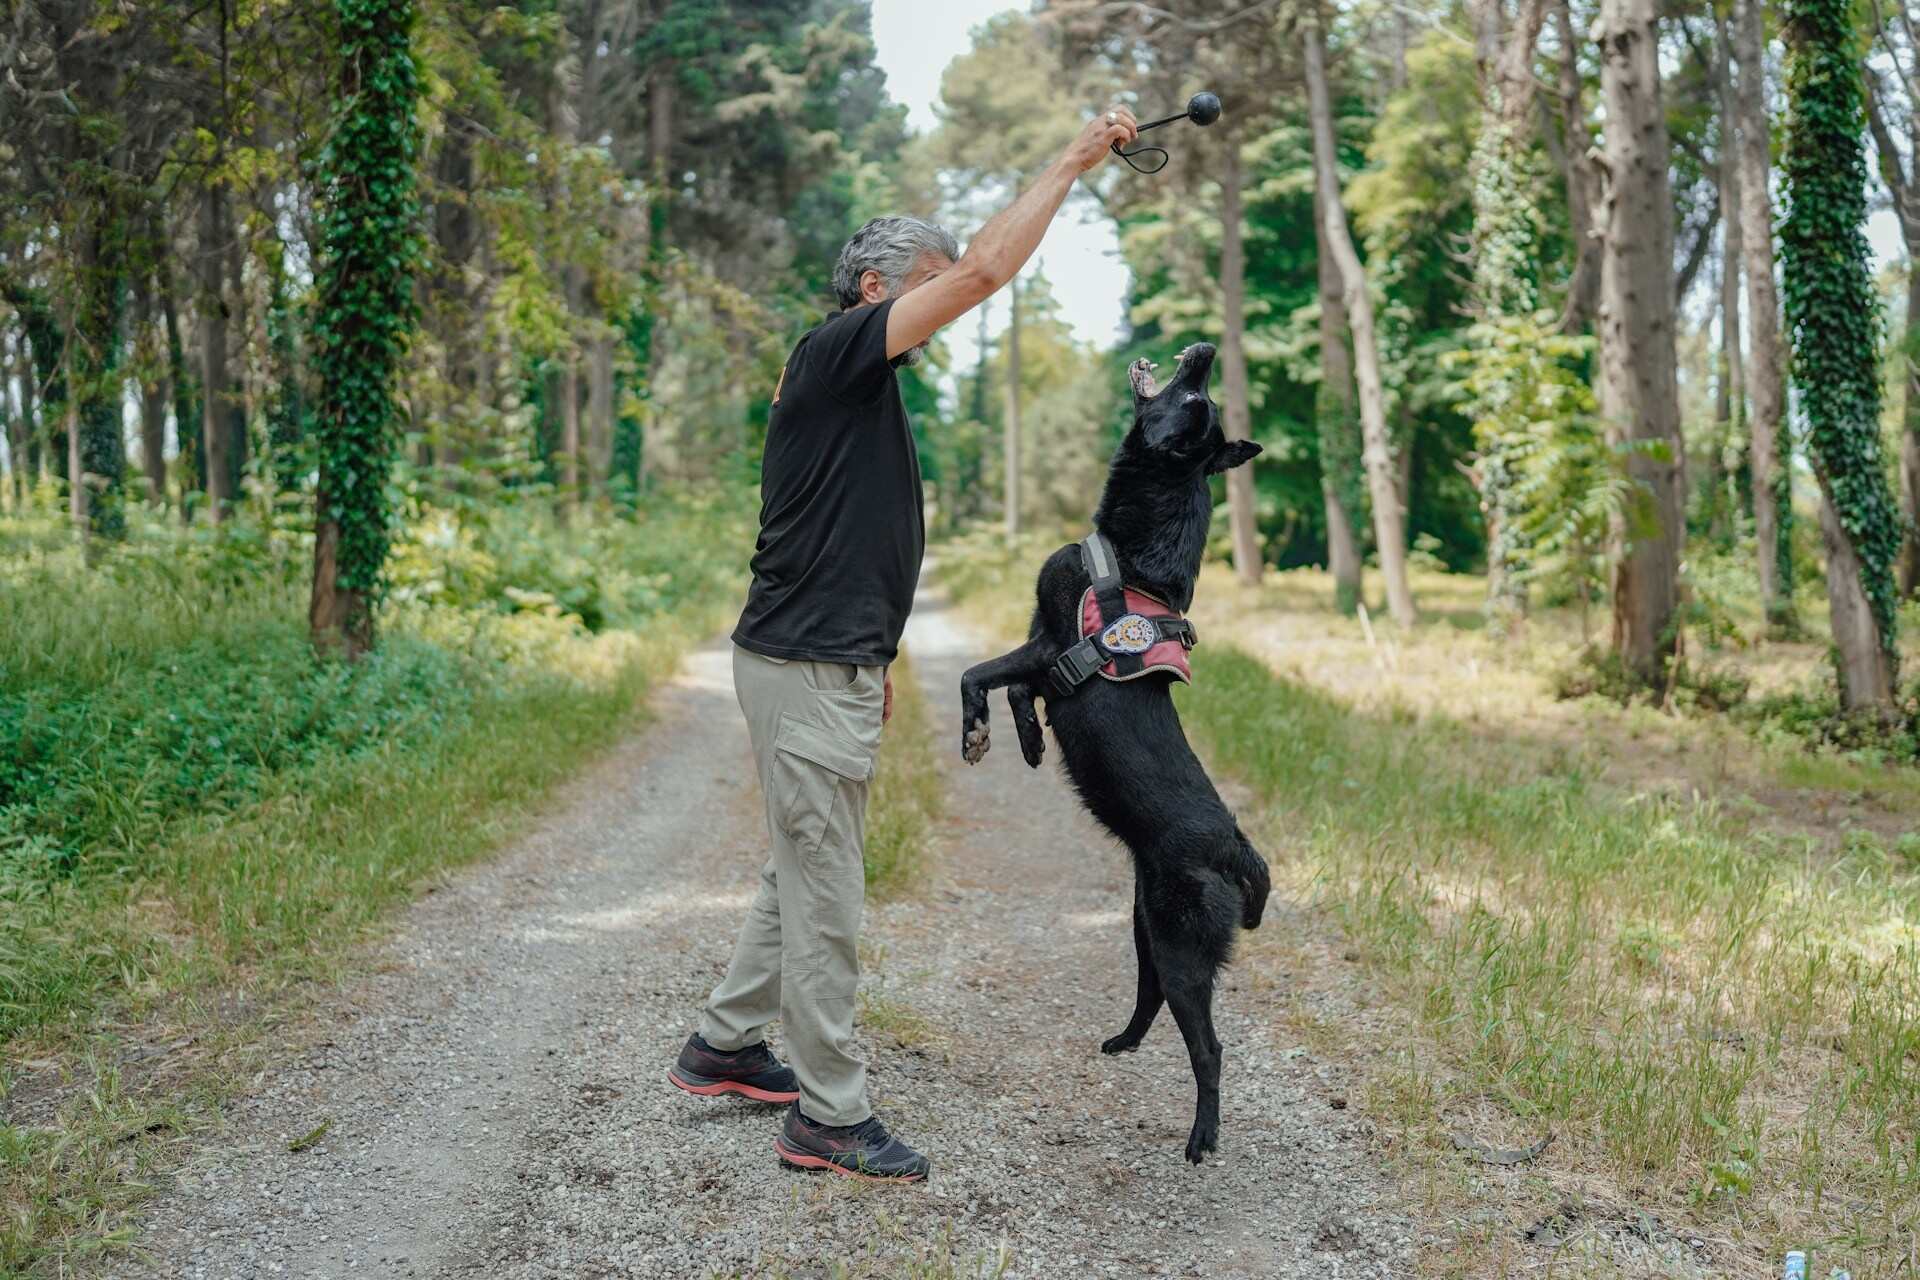 A man training his dog in a forested area